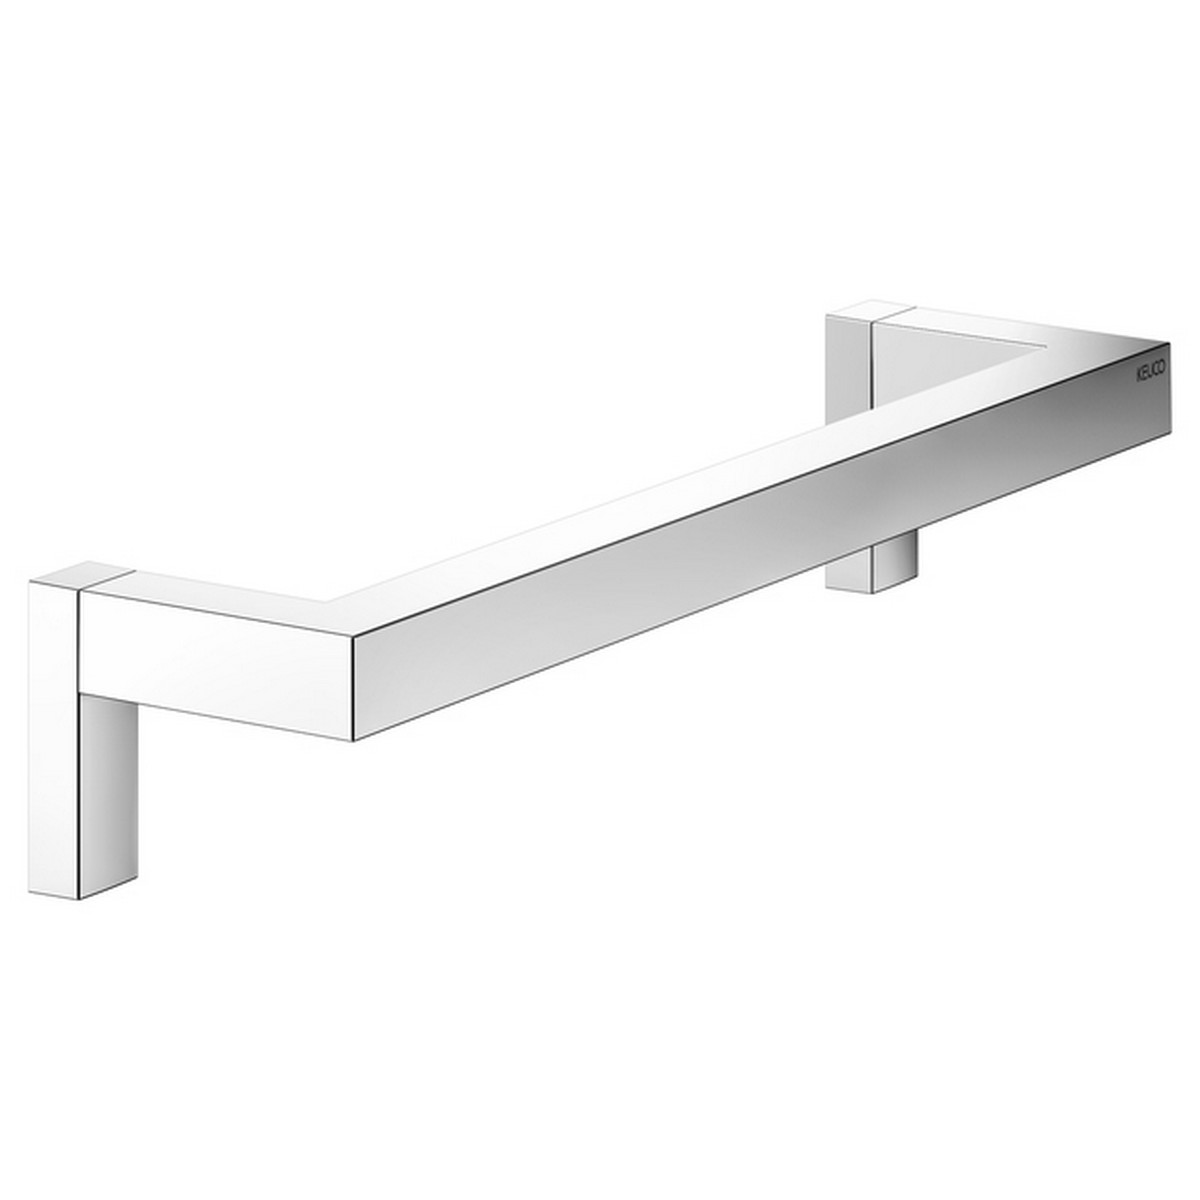 KEUCO 19107010000 EDITION 90 SQUARE 12 5/8 INCH WALL MOUNTED SUPPORT RAIL IN POLISHED CHROME